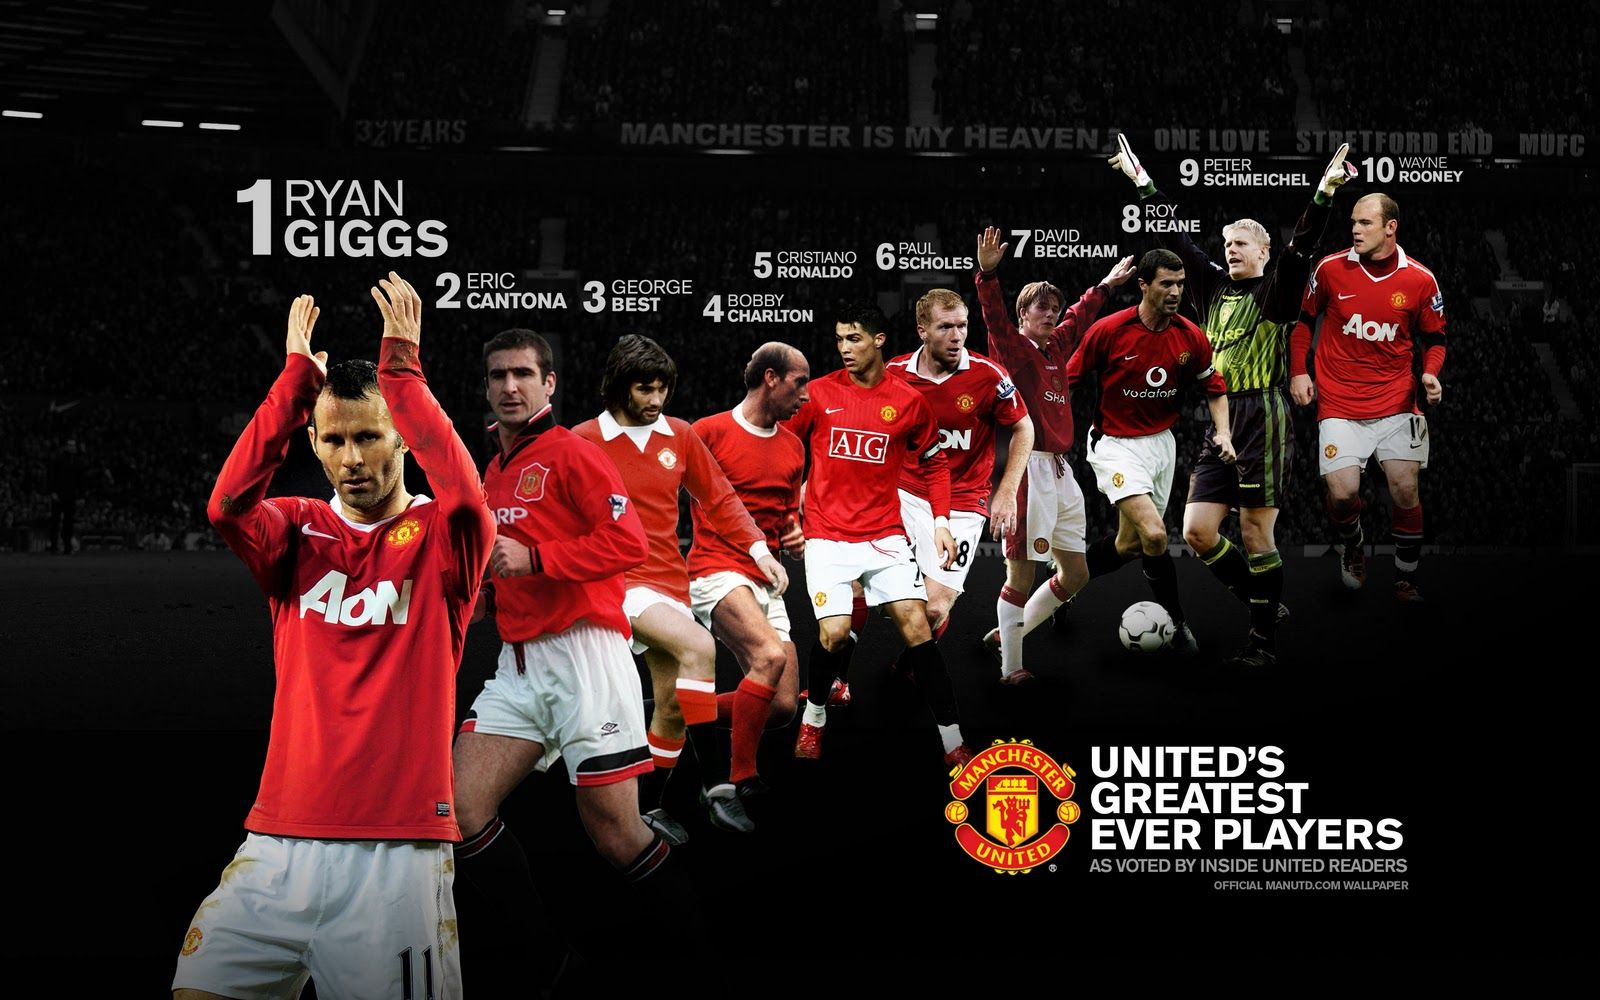 Many Missing Of Course But Not Bad Sports Manchester United